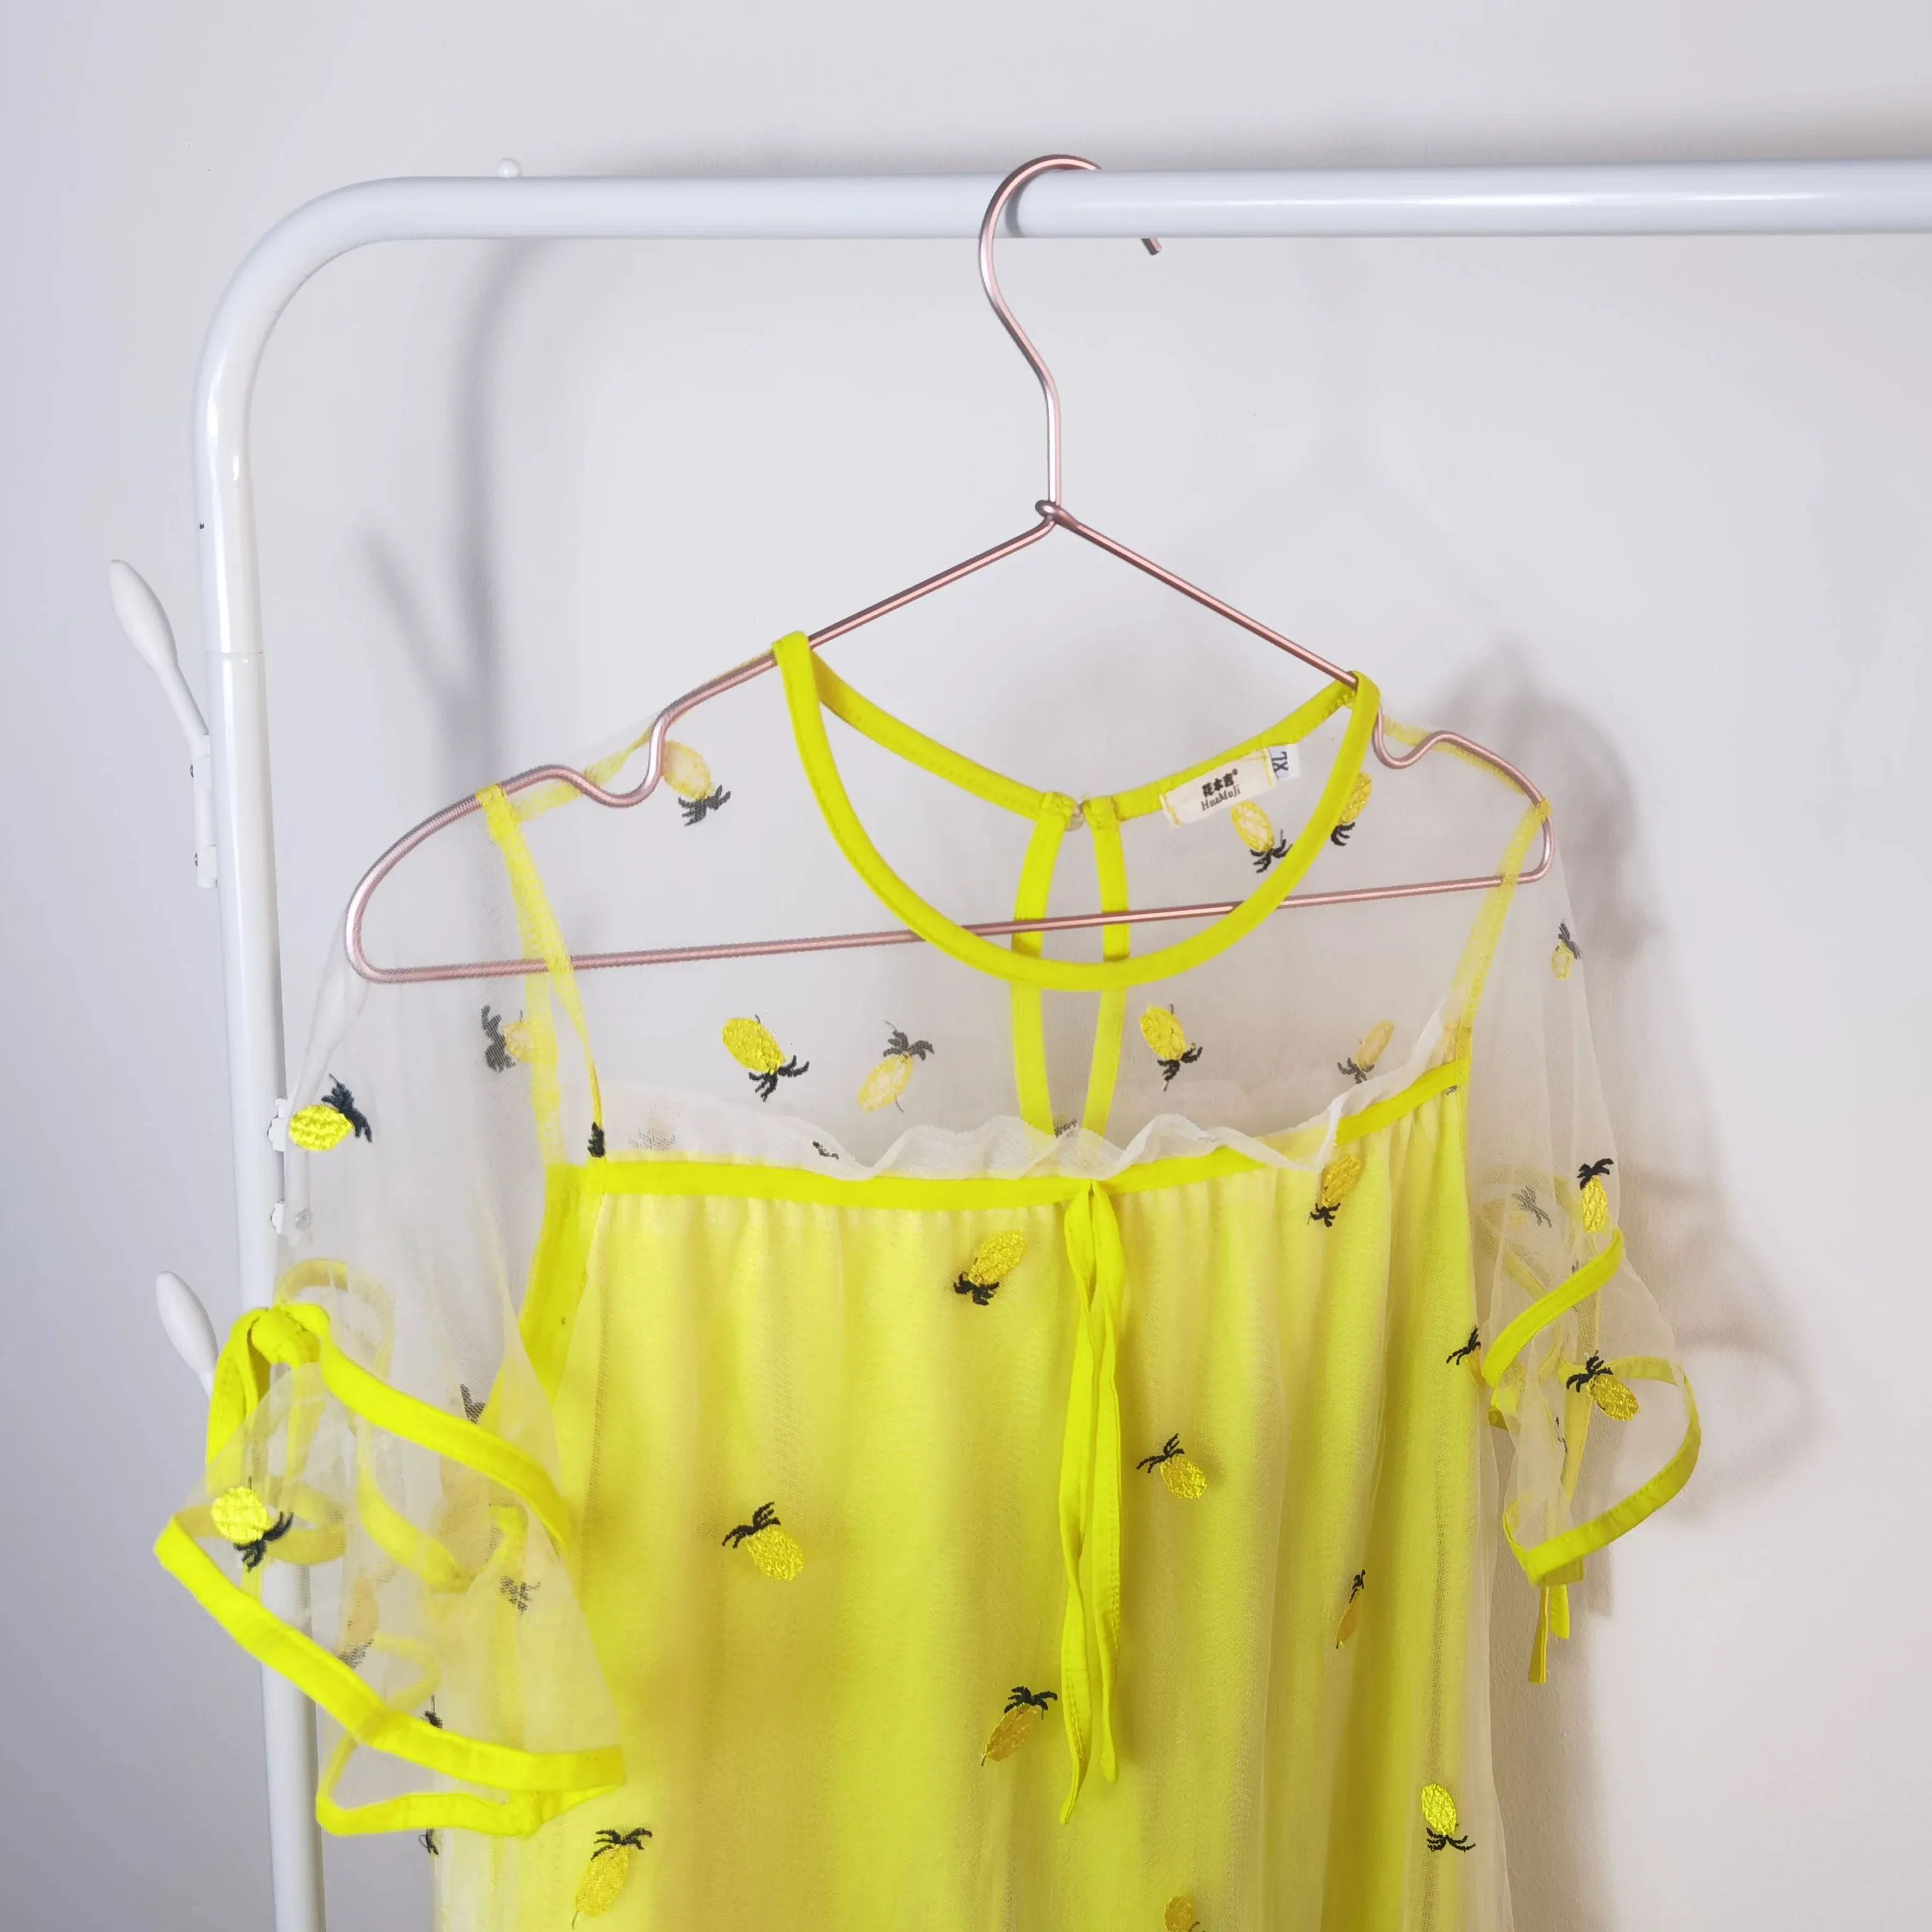 High Quality Light Weight Aluminum Clothes Notches Durable Metal Golden Hangers with Non Slip Anti-Rust Hangers